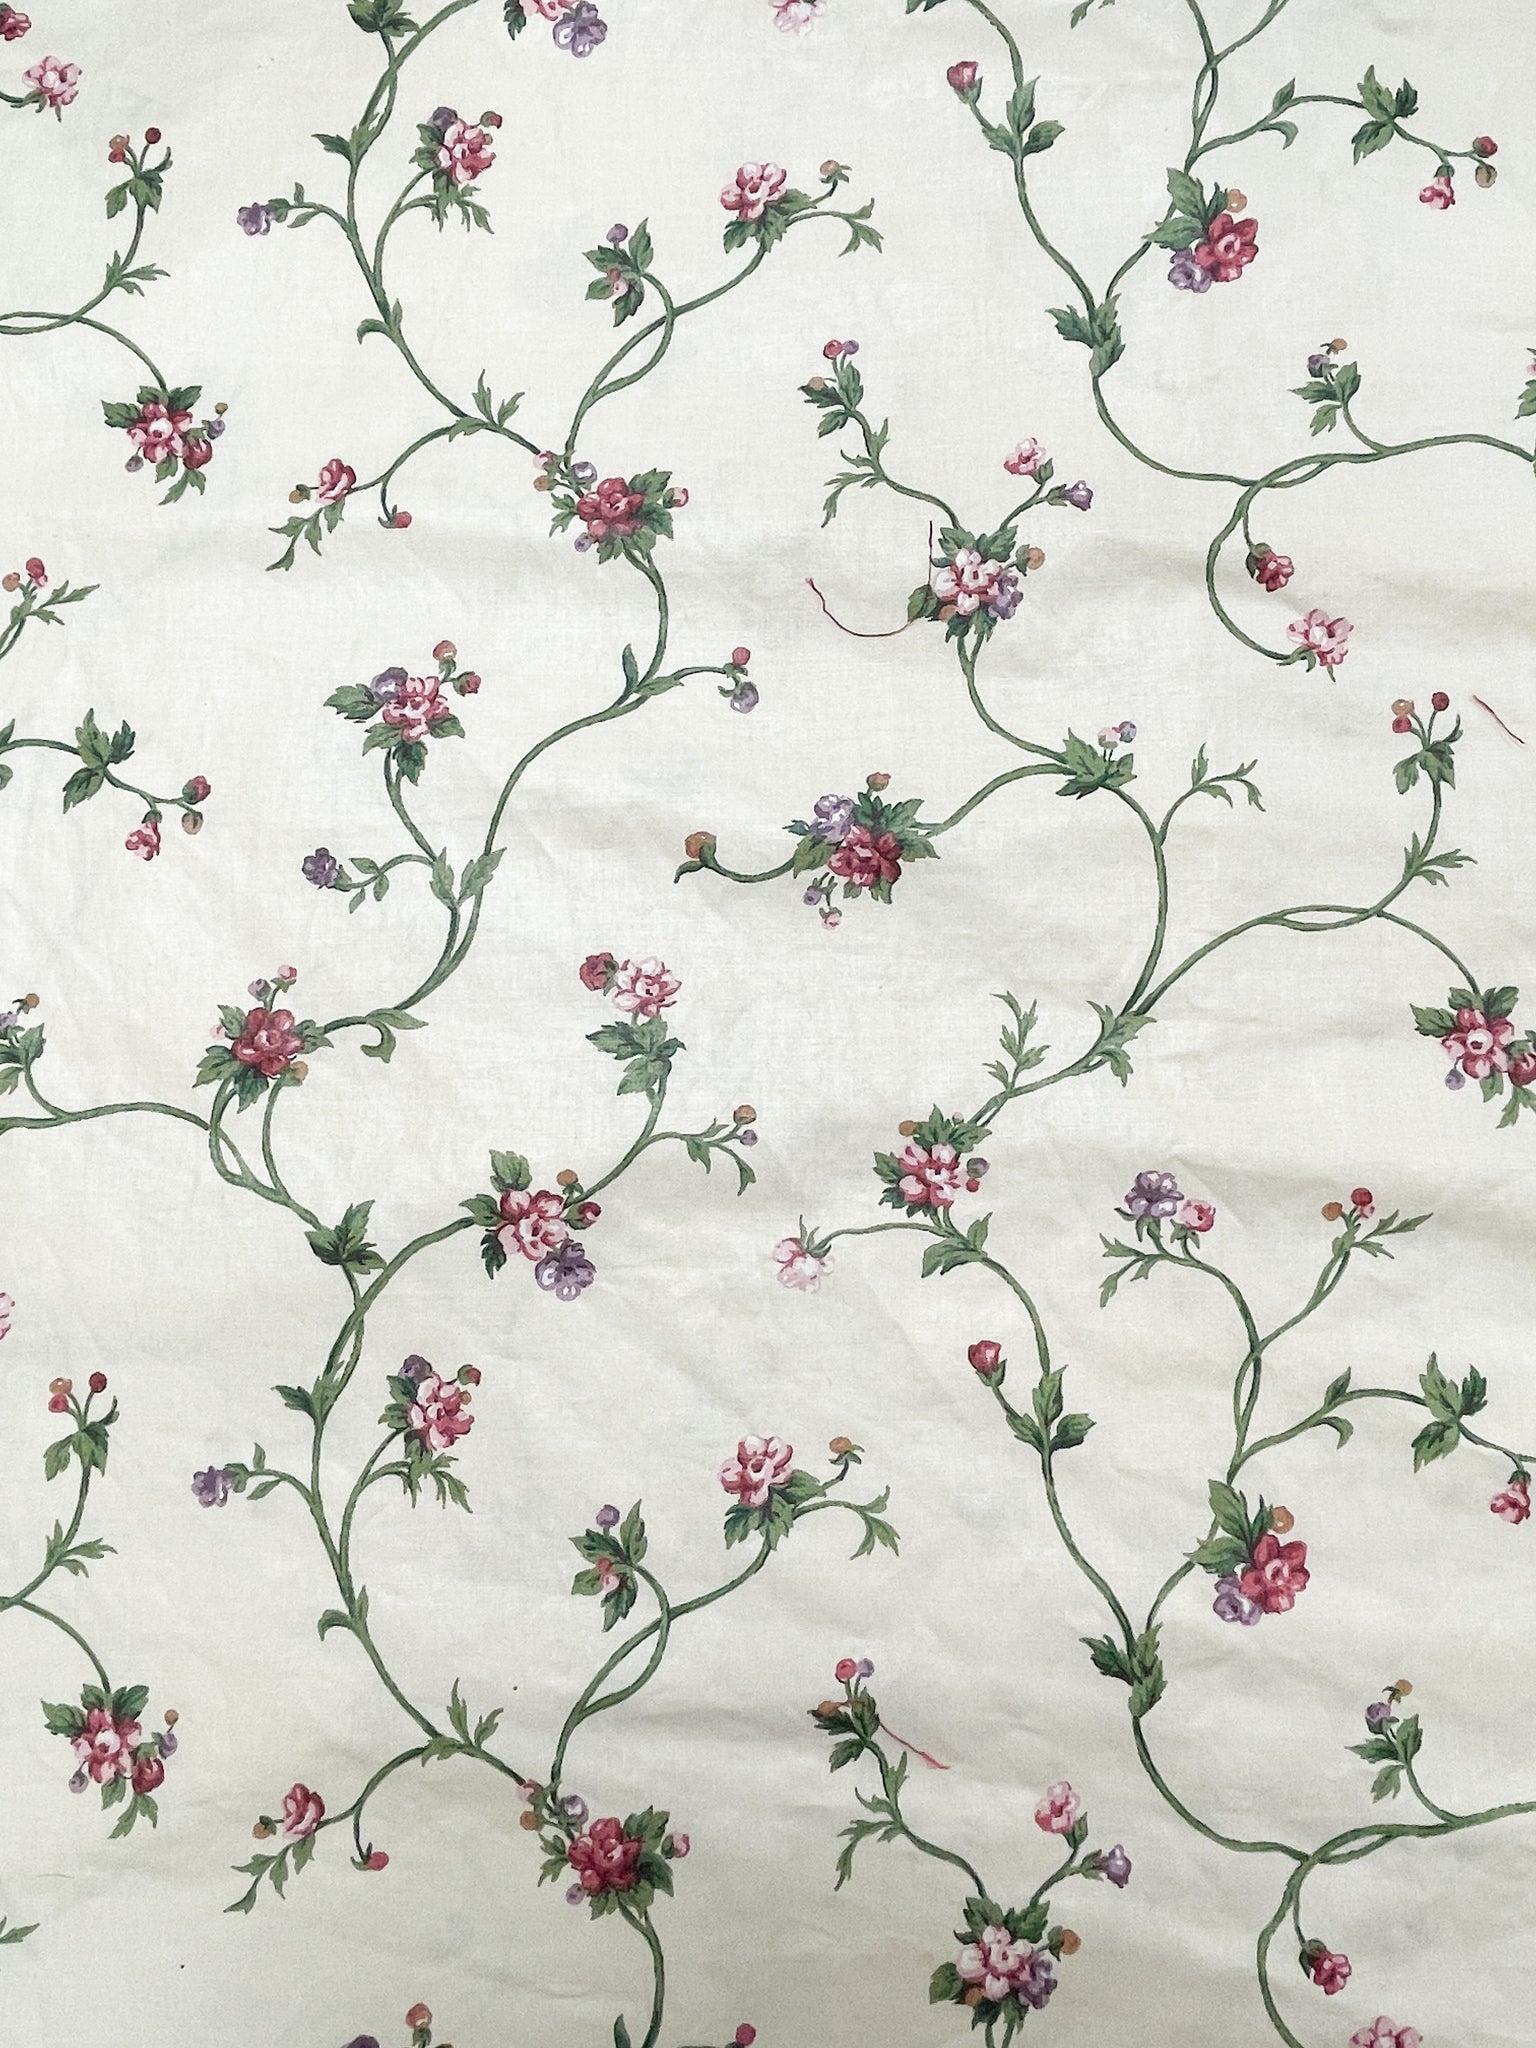 Cotton Chintz Salvaged- Off White with Burgundy Flowers on Green Stems